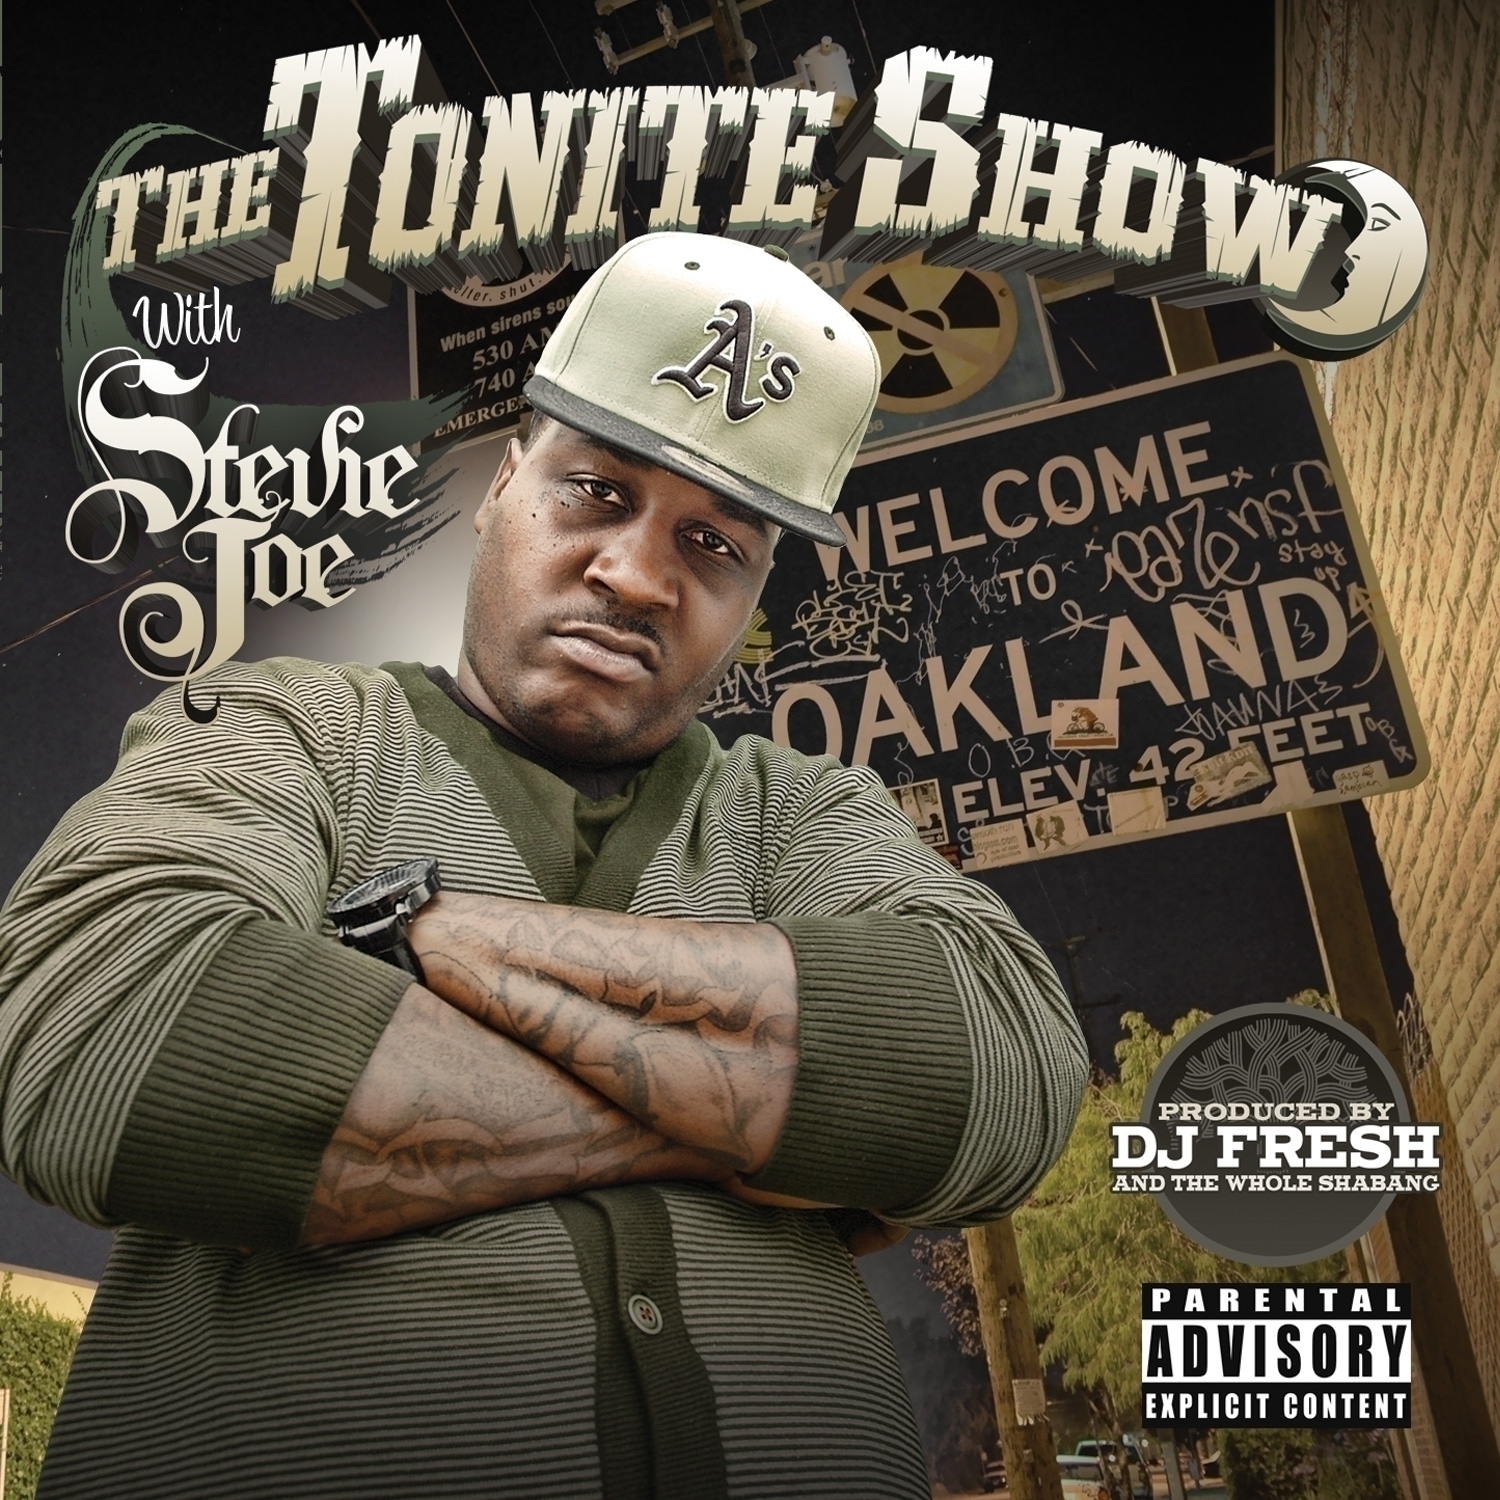 The Tonite Show with Stevie Joe: Welcome to Oakland